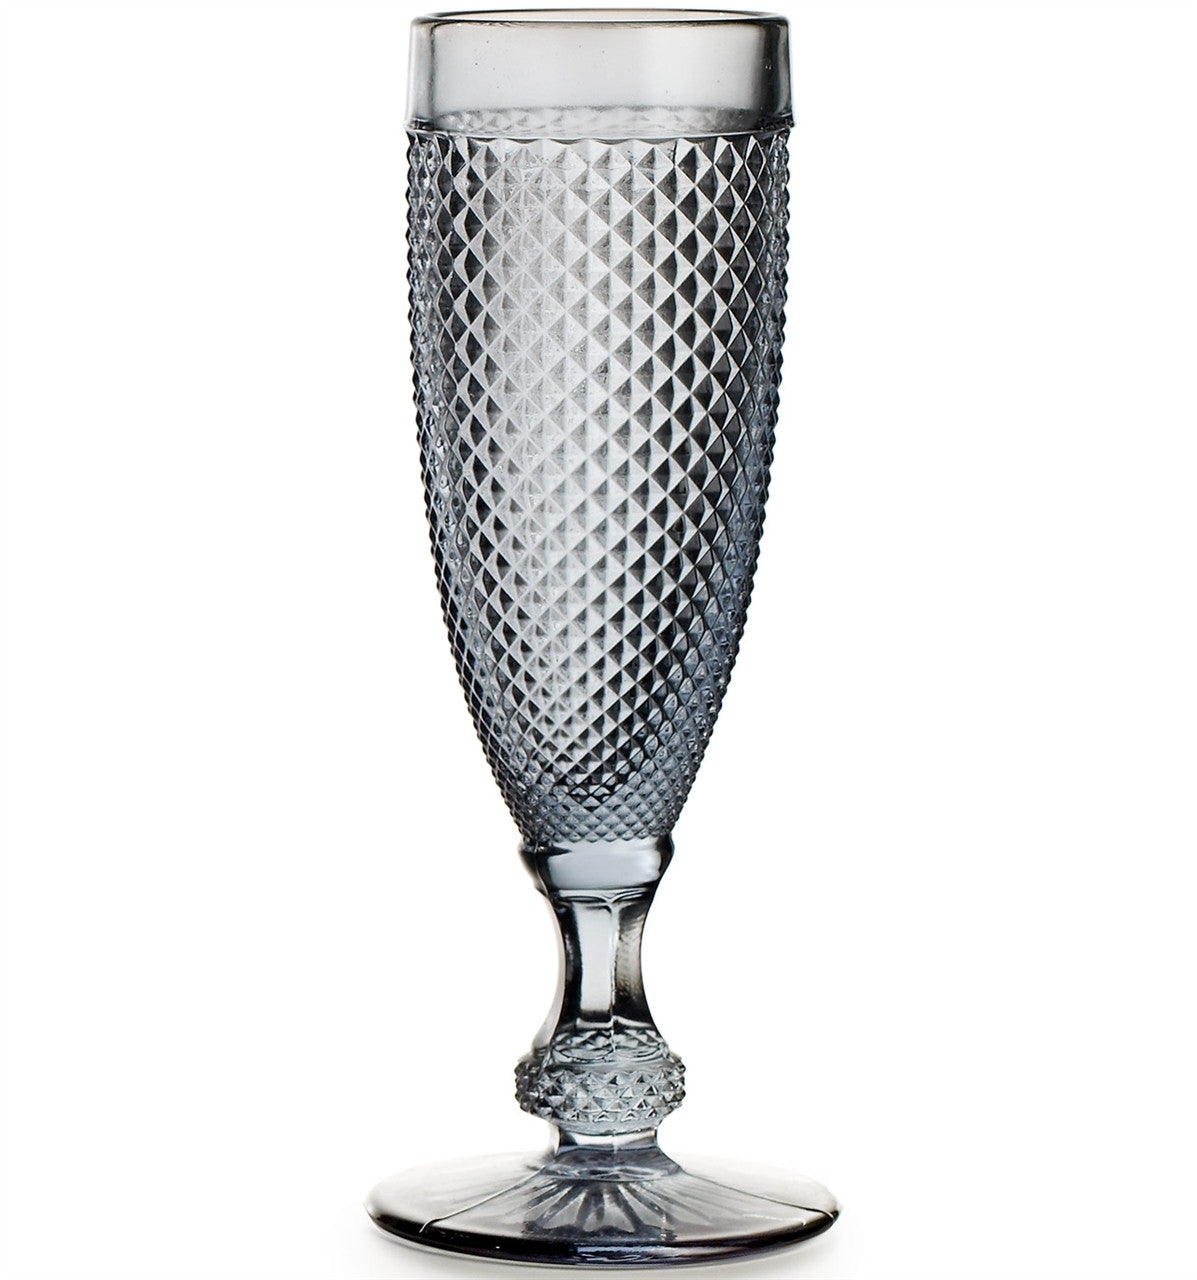 Bicos Grey Champagne Flute - RSVP Style